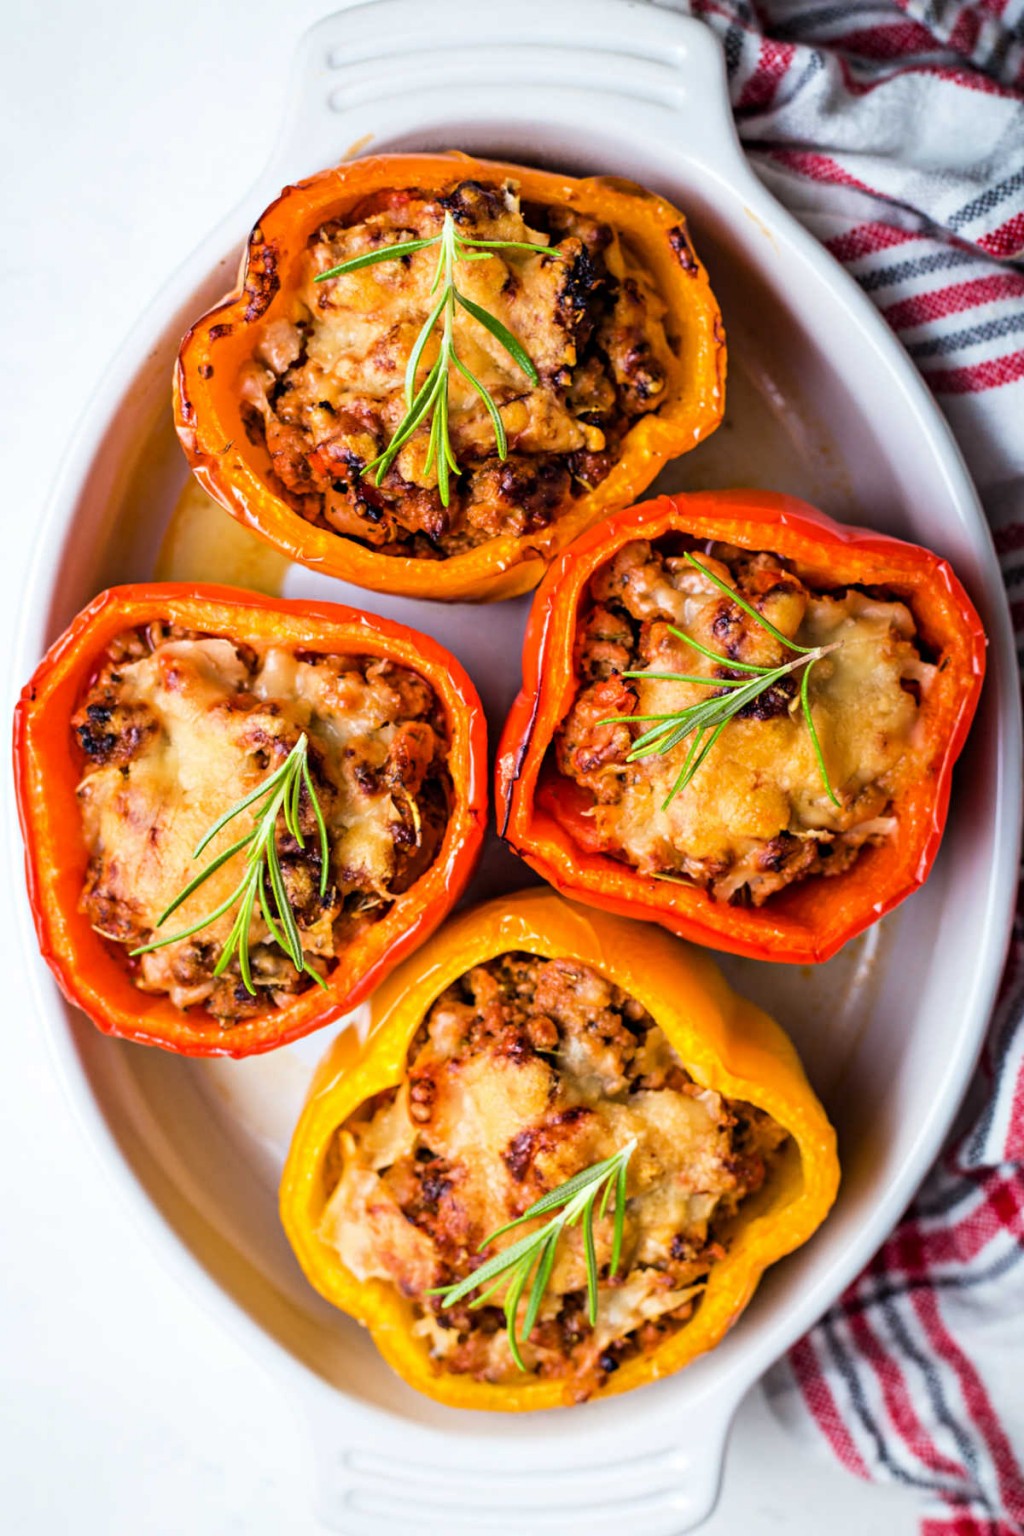 Saucy Turkey Stuffed Peppers - Life, Love, and Good Food